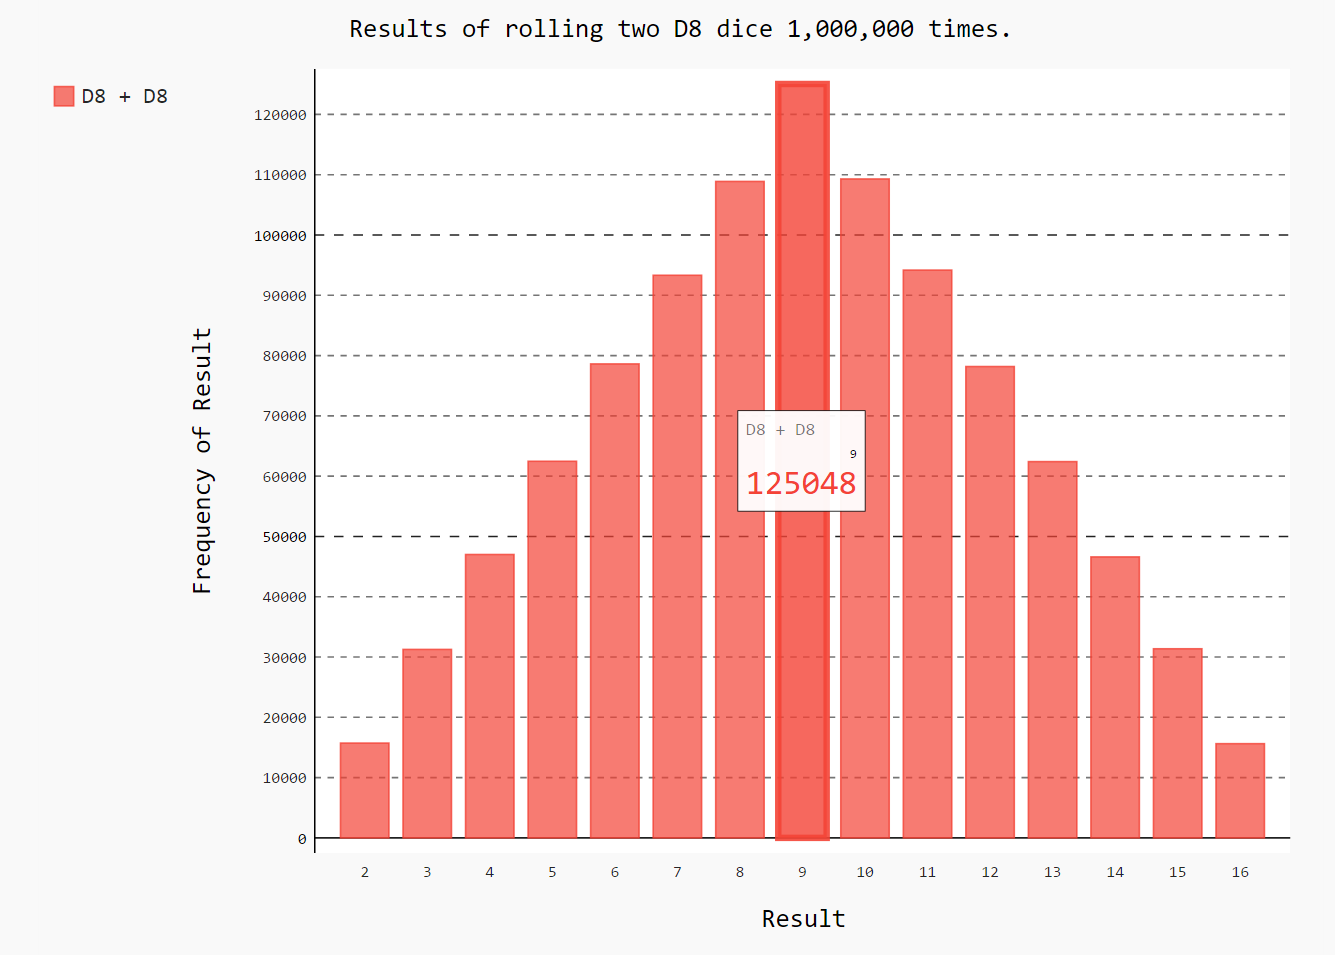 Graph of results of rolling two D8 dice, one million times